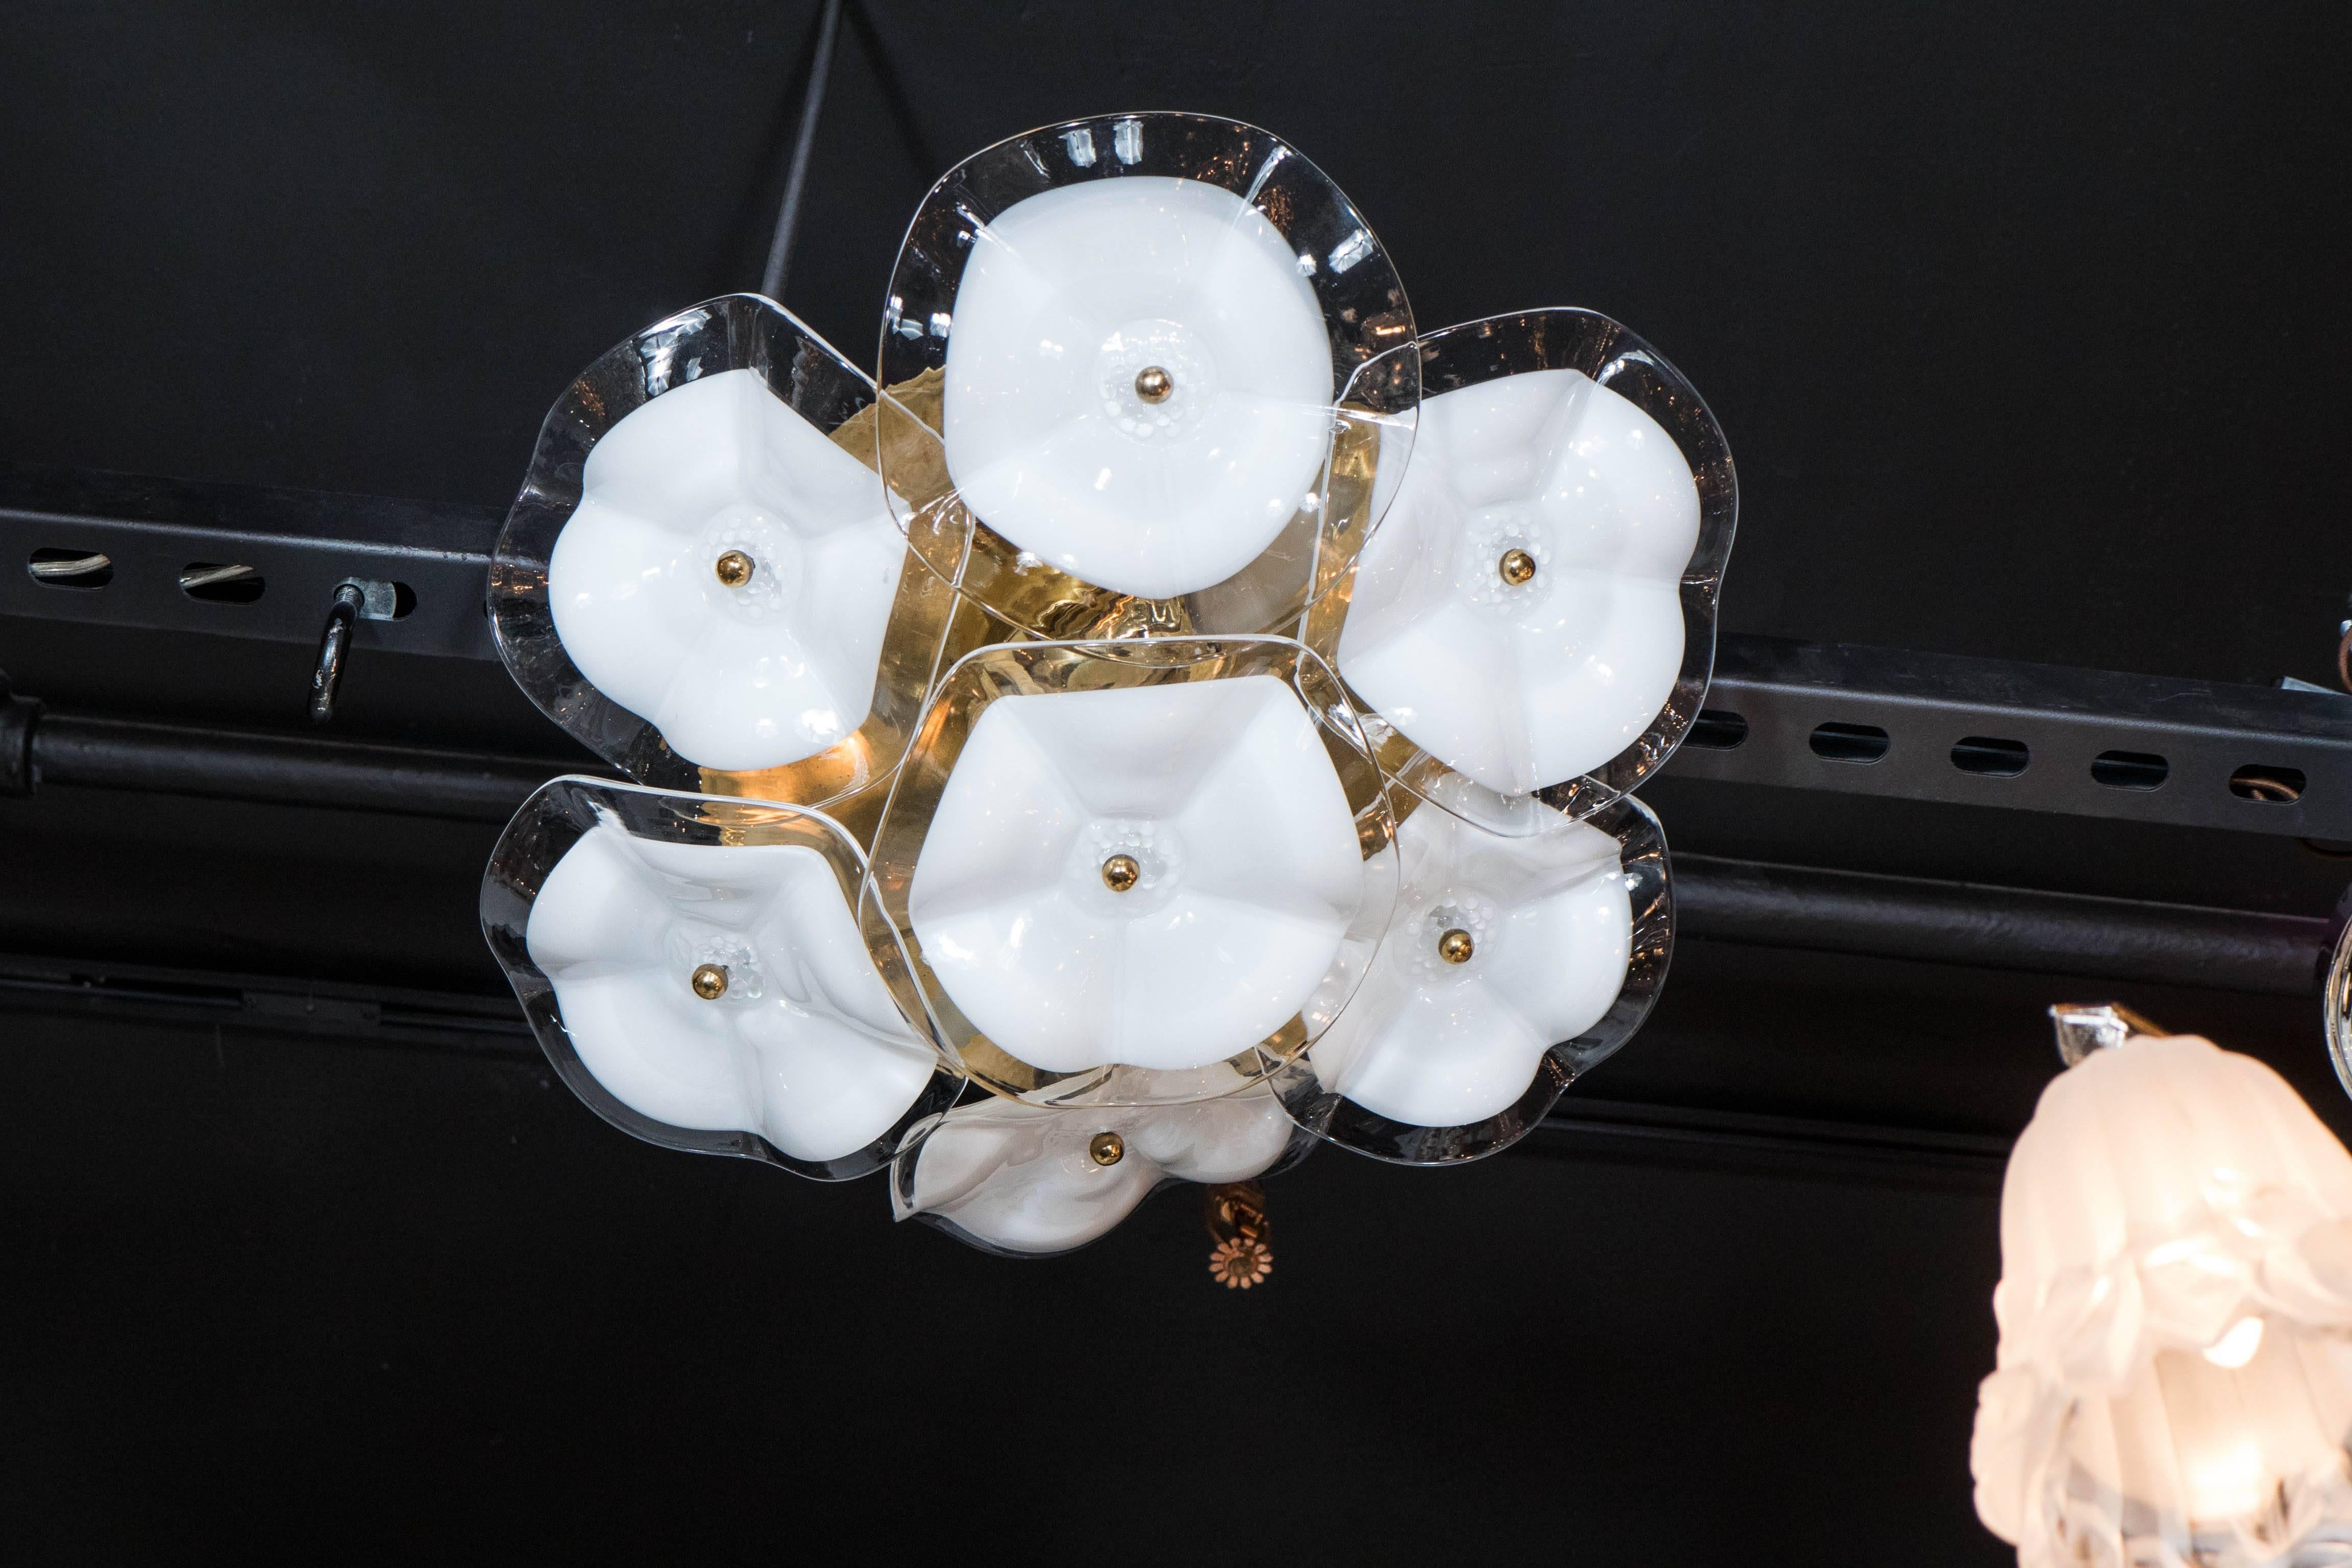 An exquisite Mazzega flush mount chandelier consisting of a polished brass cap supporting seven two-toned glass flowers held in place by brass pearl fittings. Each piece is handblown. The clear and white glass pieces appear to float as they are